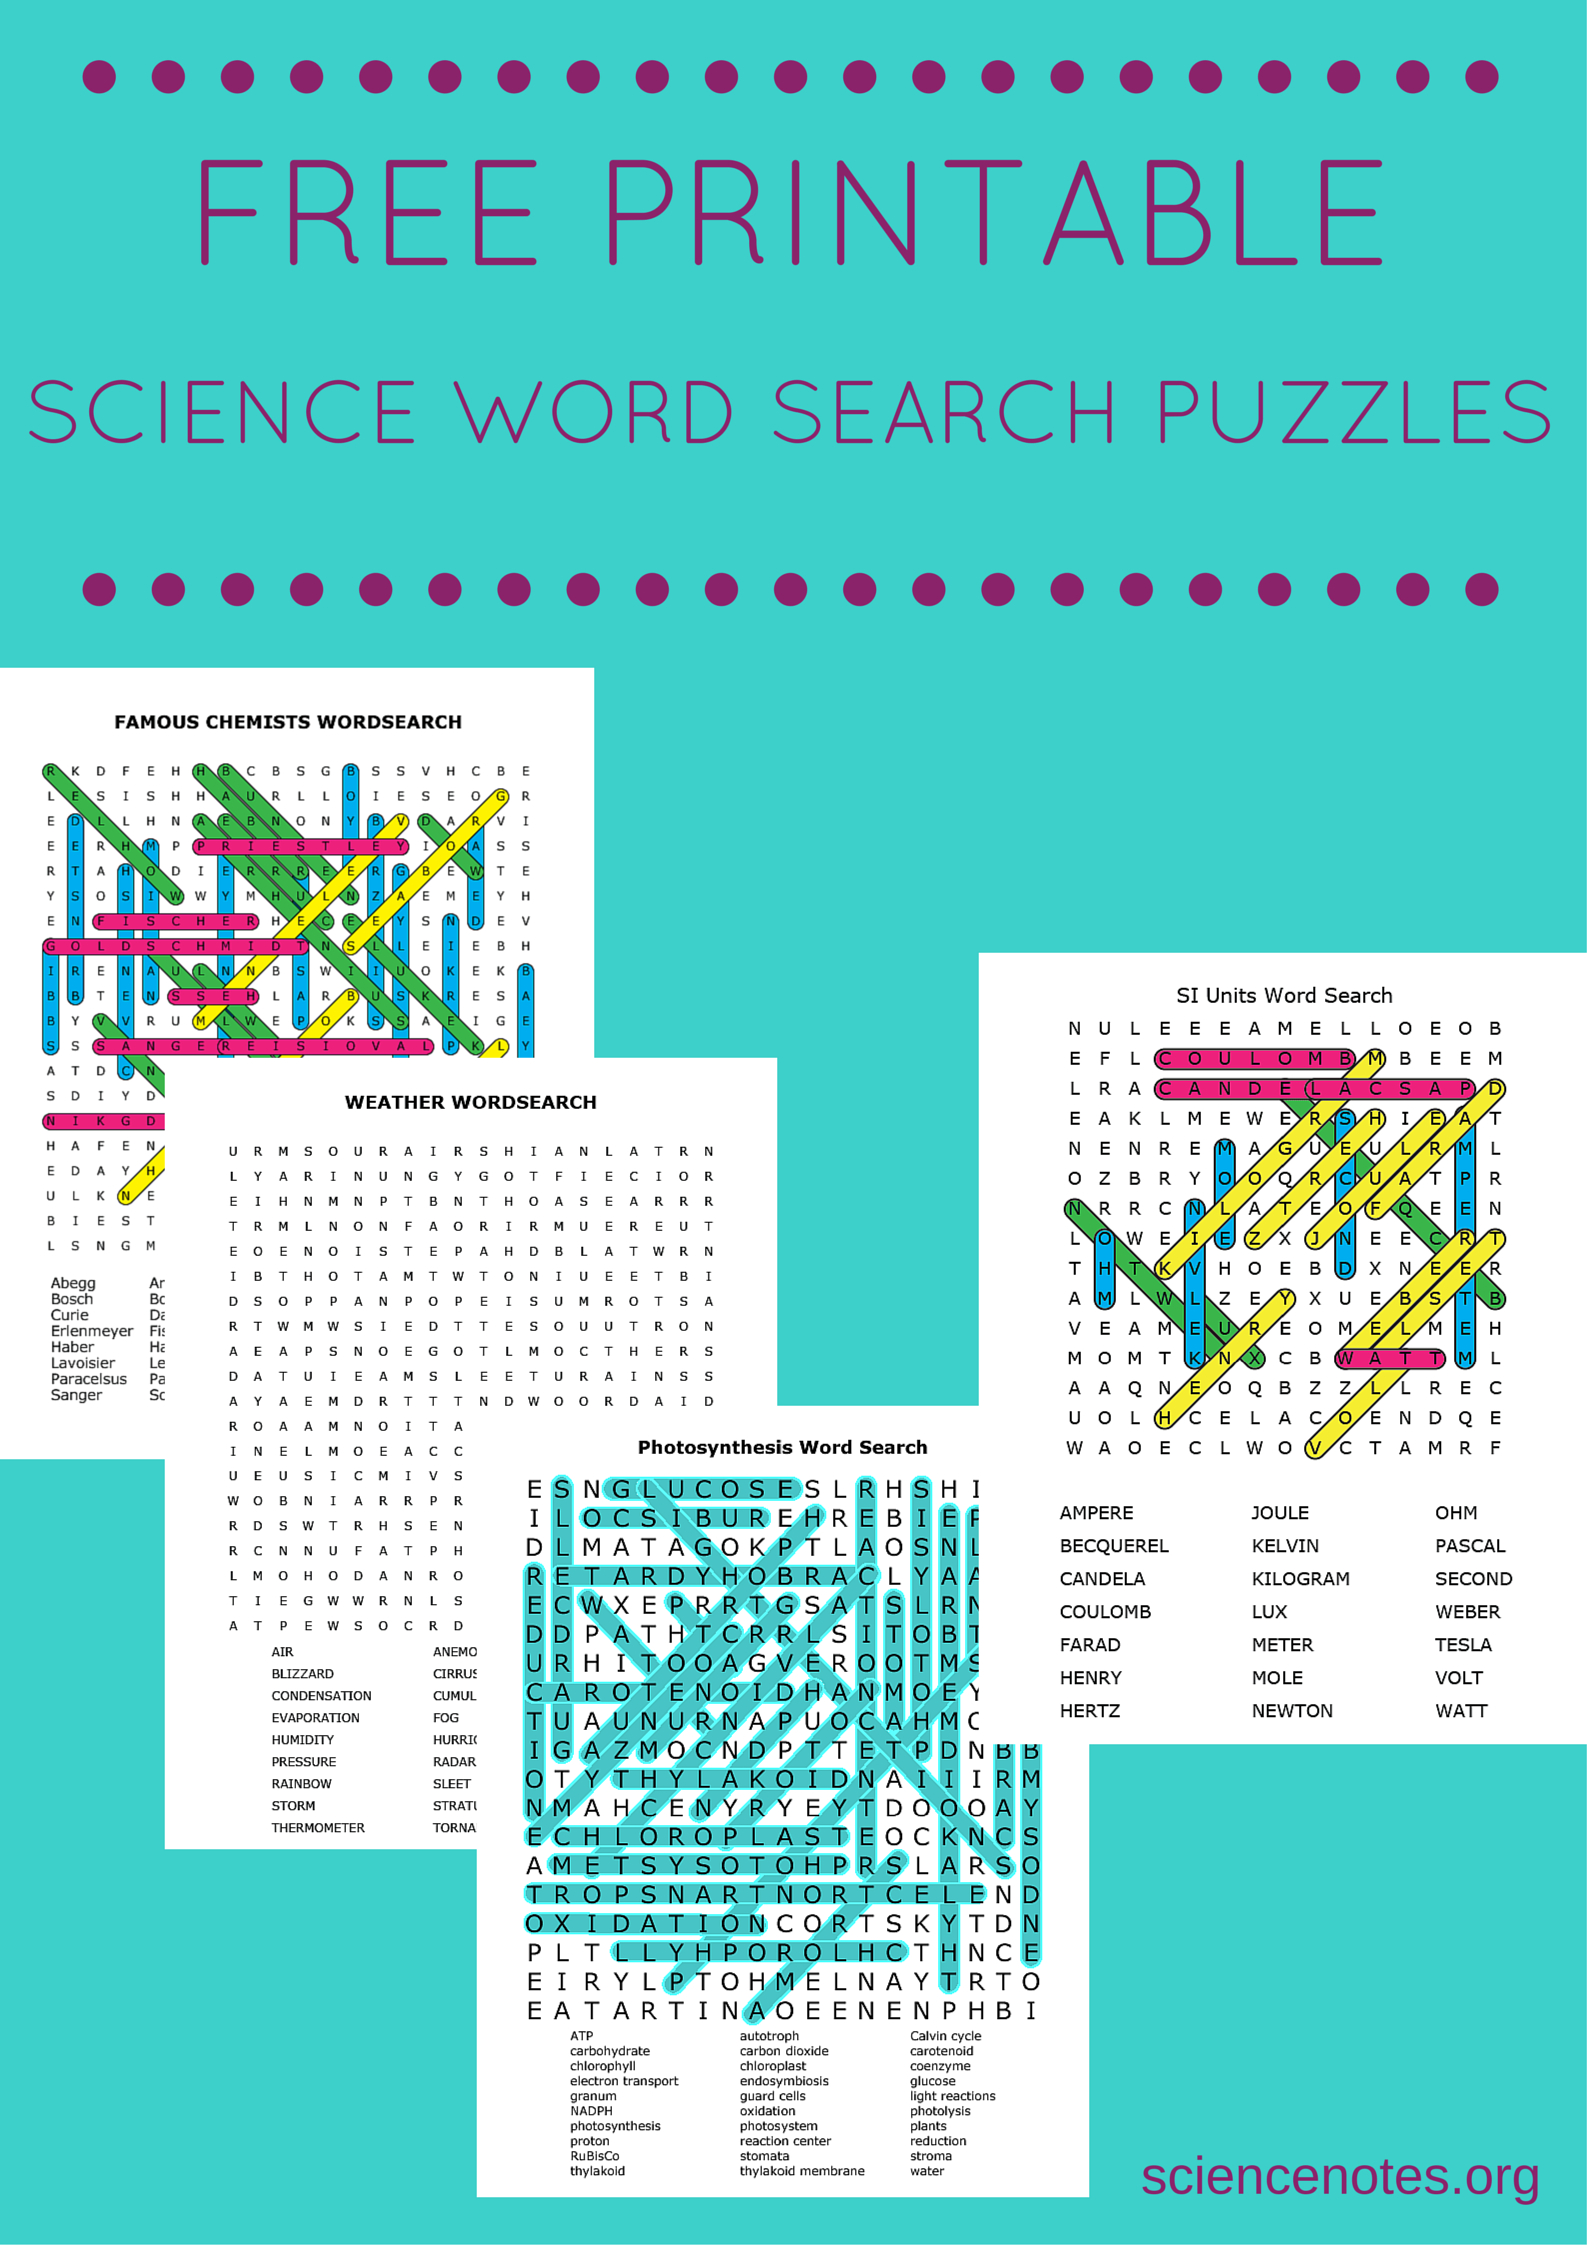 Free Printable Science Word Search Puzzles - Printable Crossword Word Search Puzzles